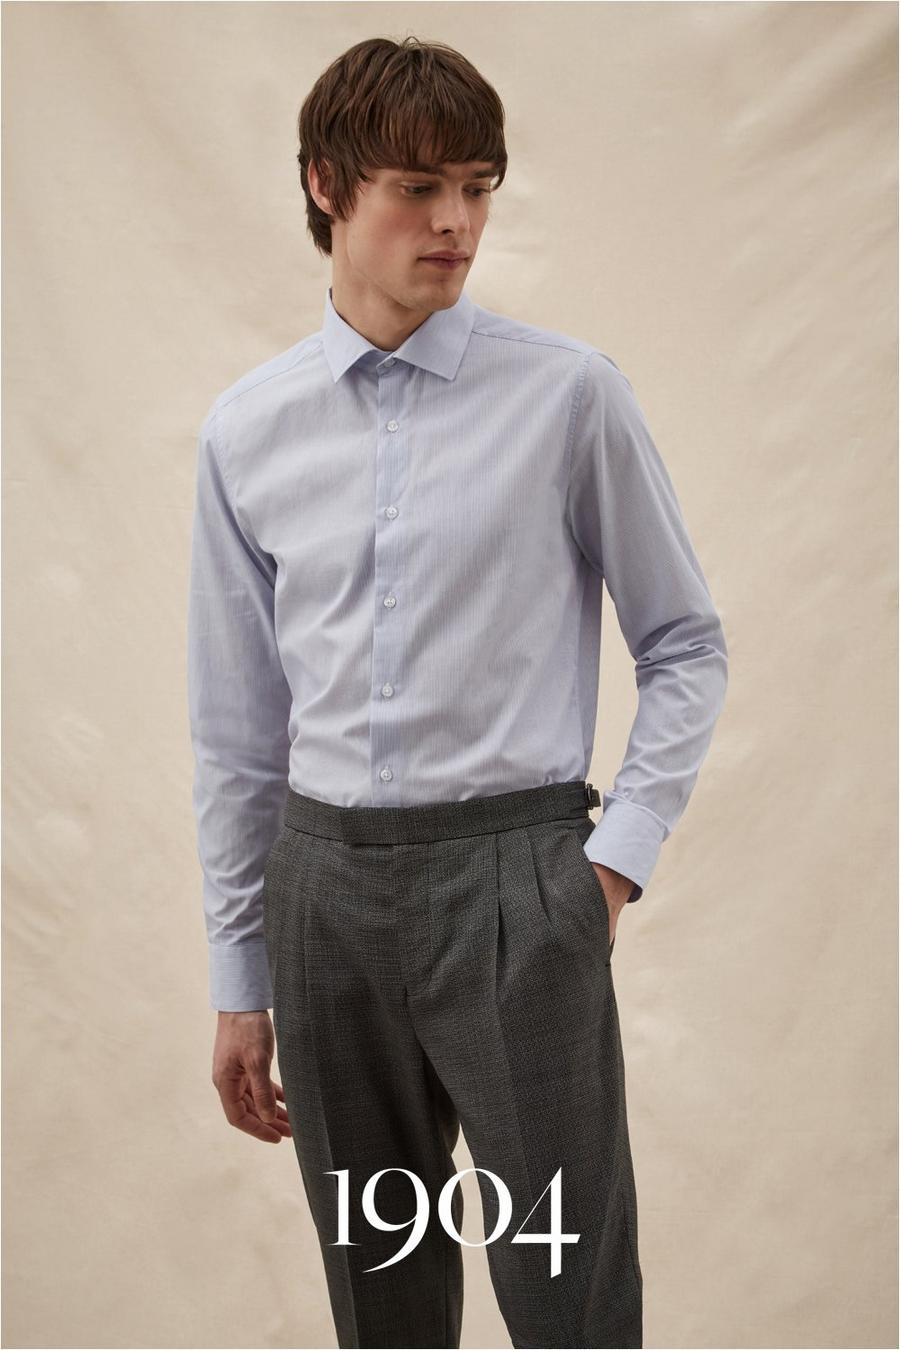 194 Pinstripe Shirt With Spread Collar